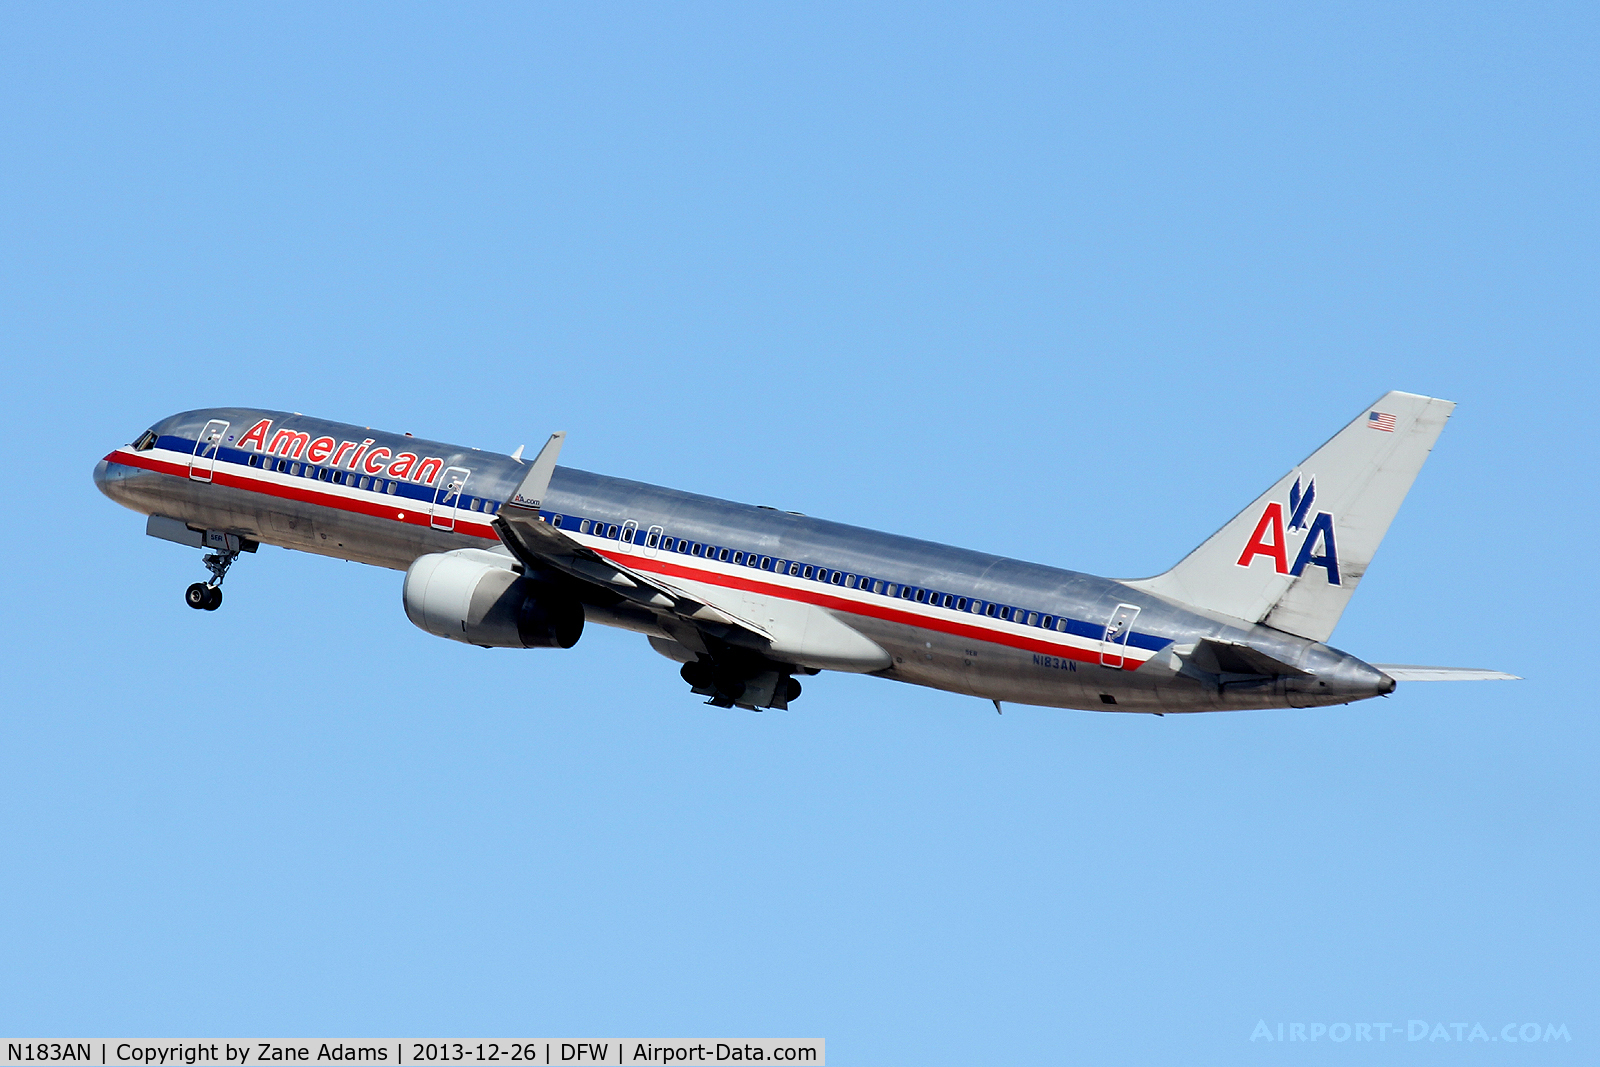 N183AN, 1999 Boeing 757-223 C/N 29593, American Airlines at DFW Airport